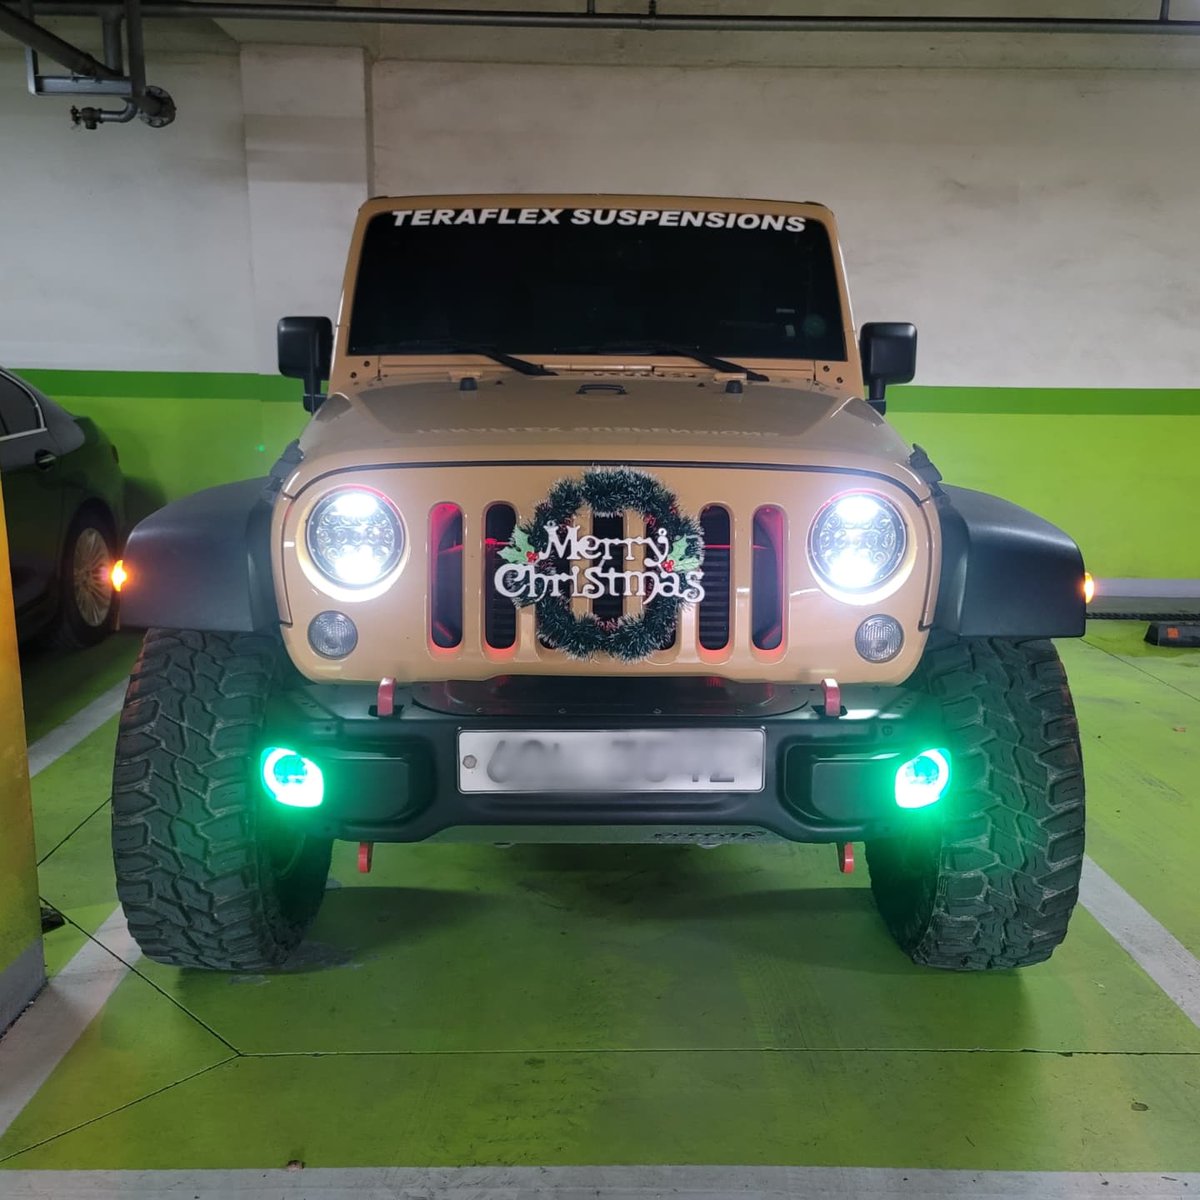 New headlights, new fog lights, rewired grill lights and painted the bumper... What was YOUR last mod?